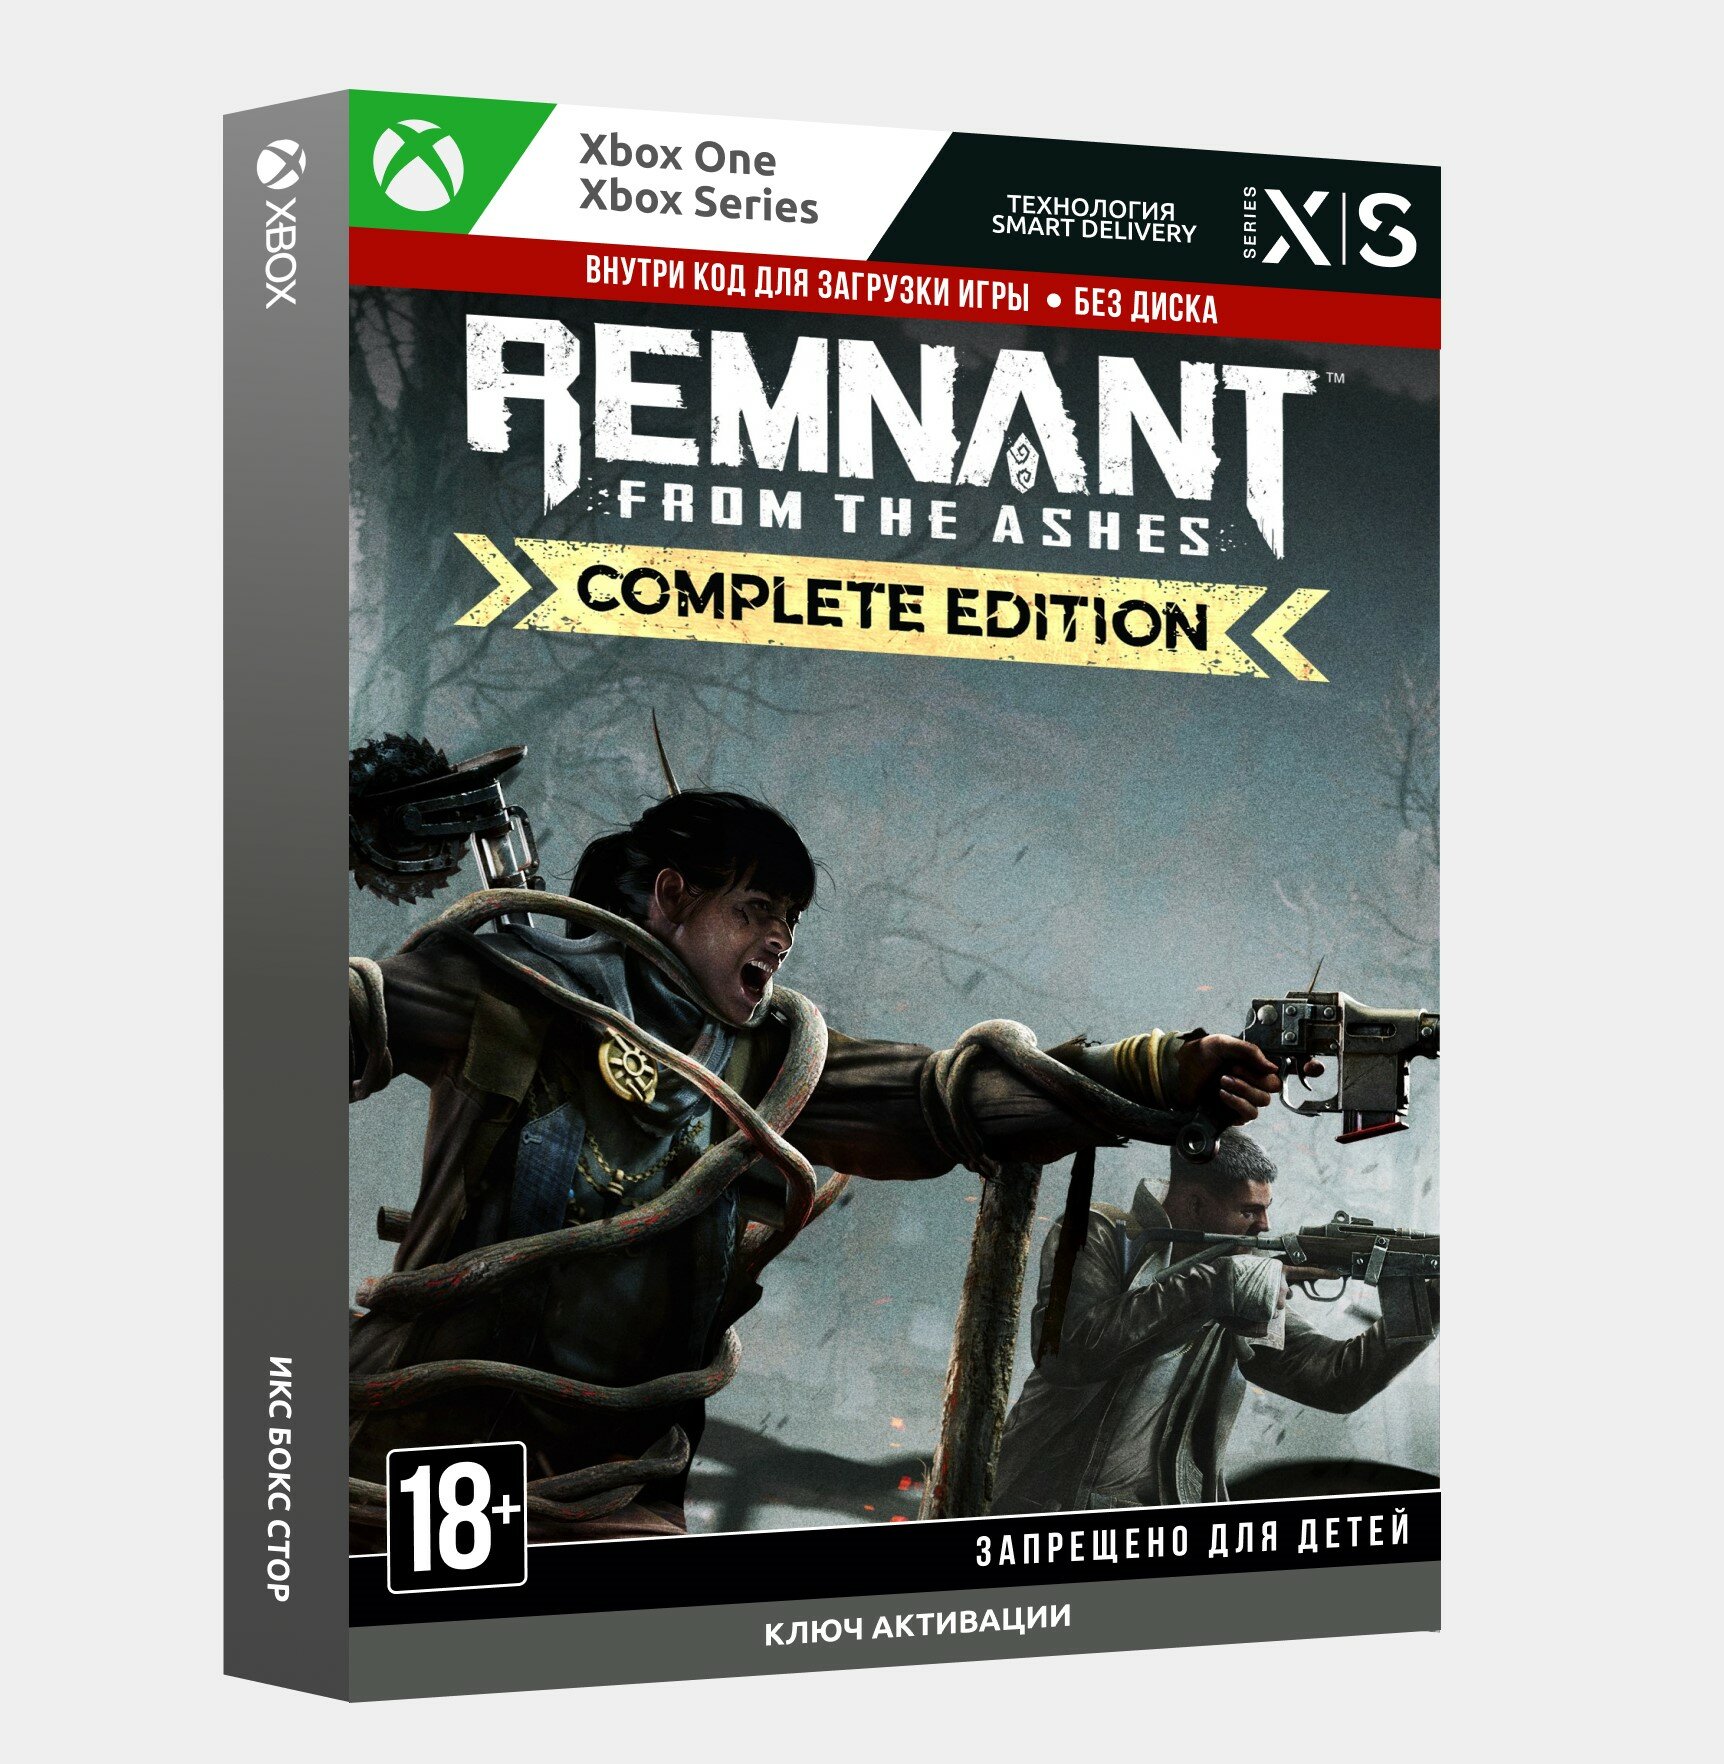 Игра Remnant: From the Ashes – Complete Edition для Xbox One/Series X|S Русский язык электронный ключ Аргентина